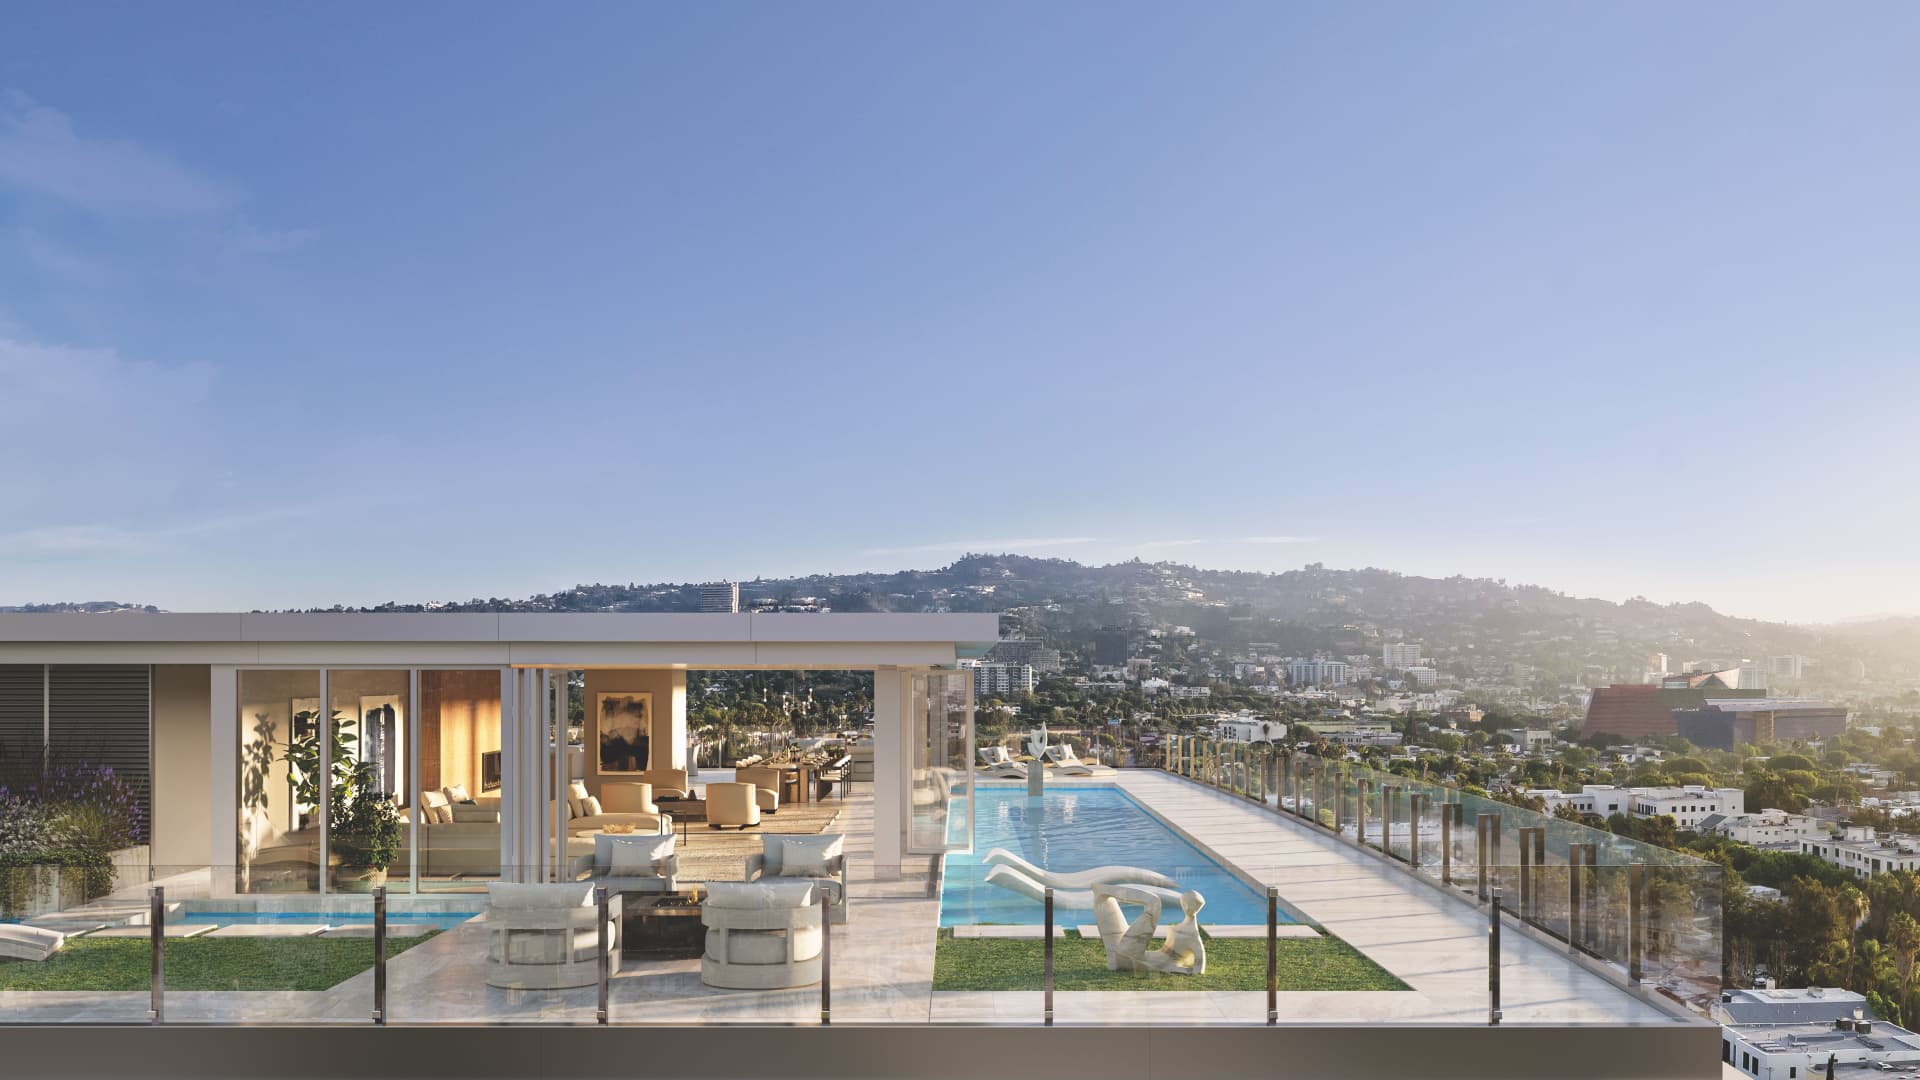 Luxury developers in Los Angeles bet someone will pay record prices for these condos